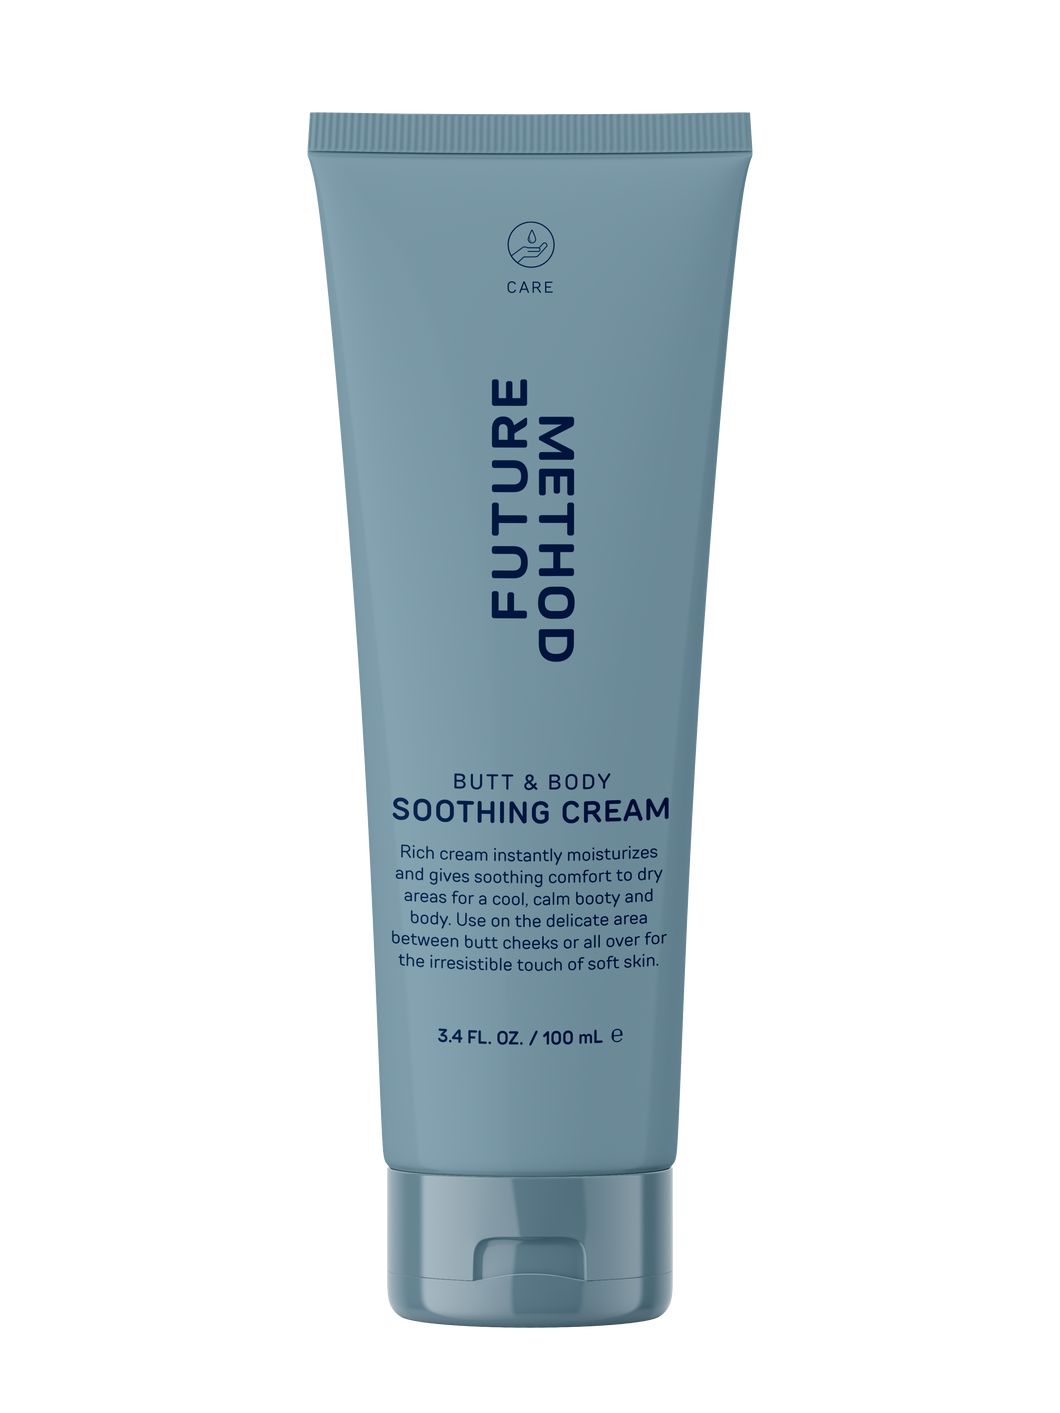 Butt & Body Soothing Cream